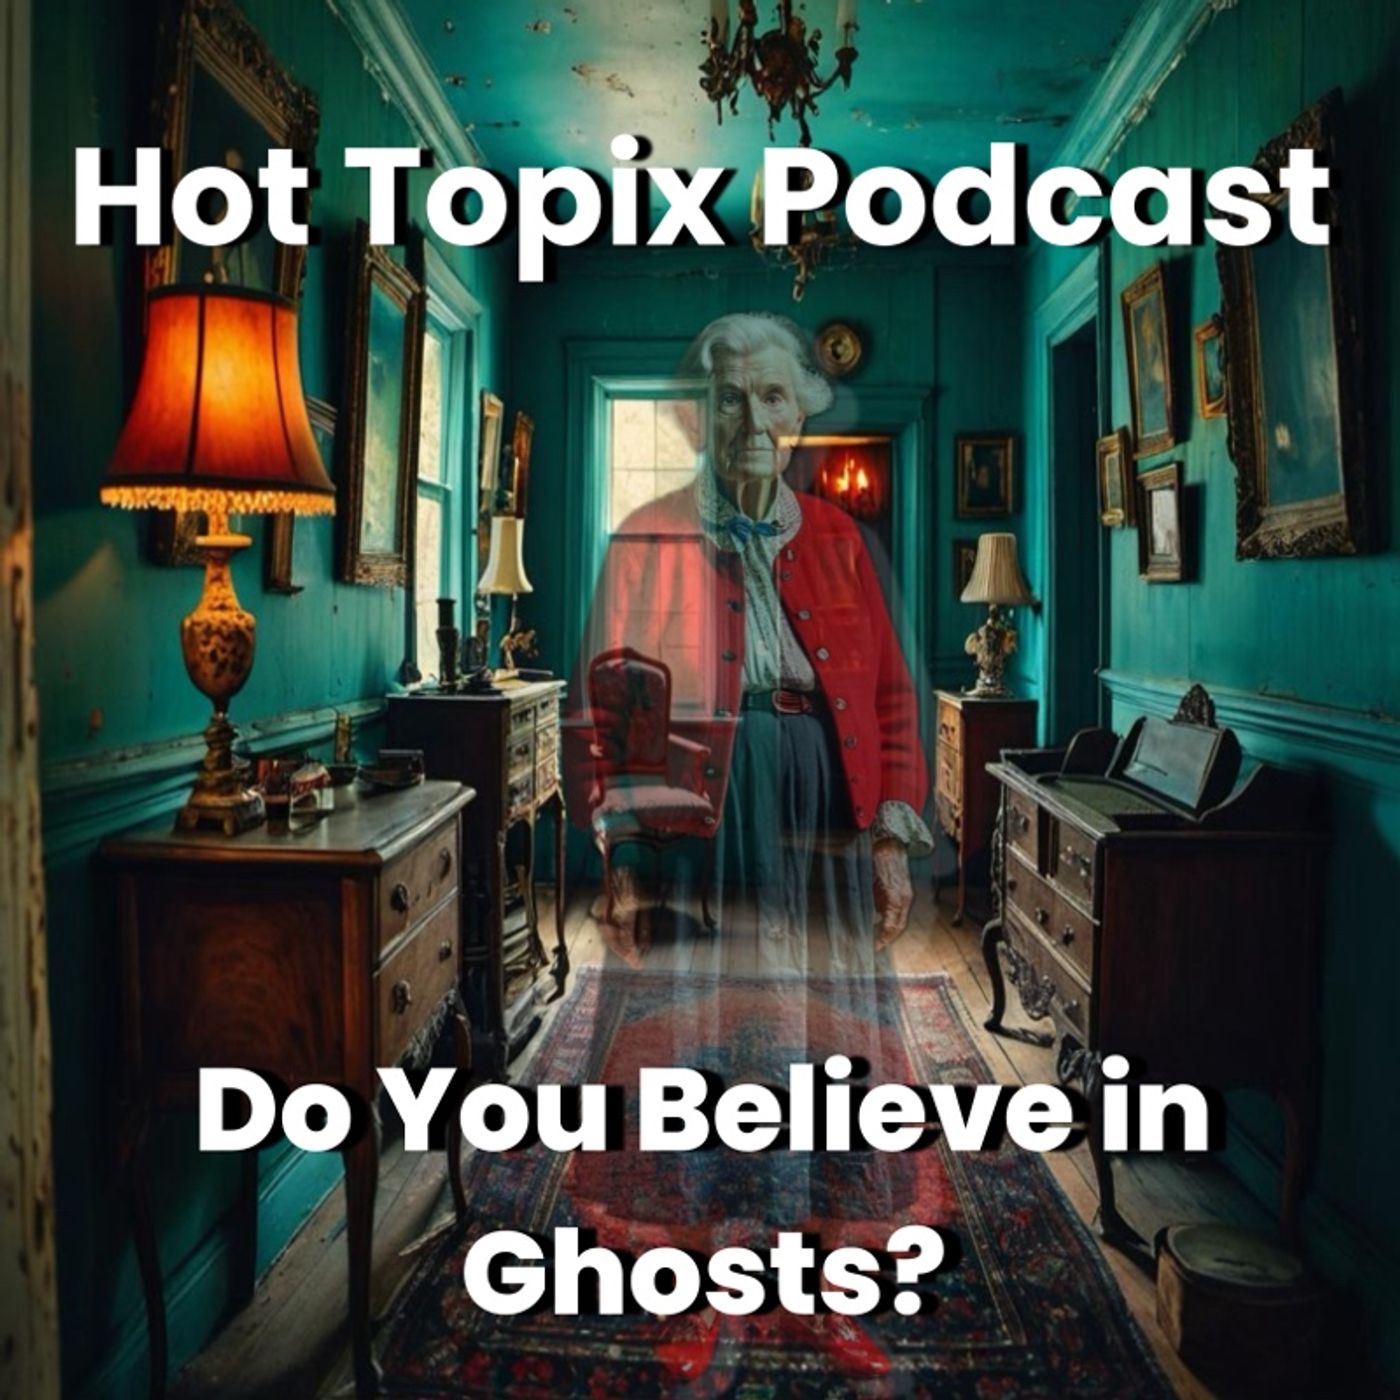 Do You Believe in Ghosts?